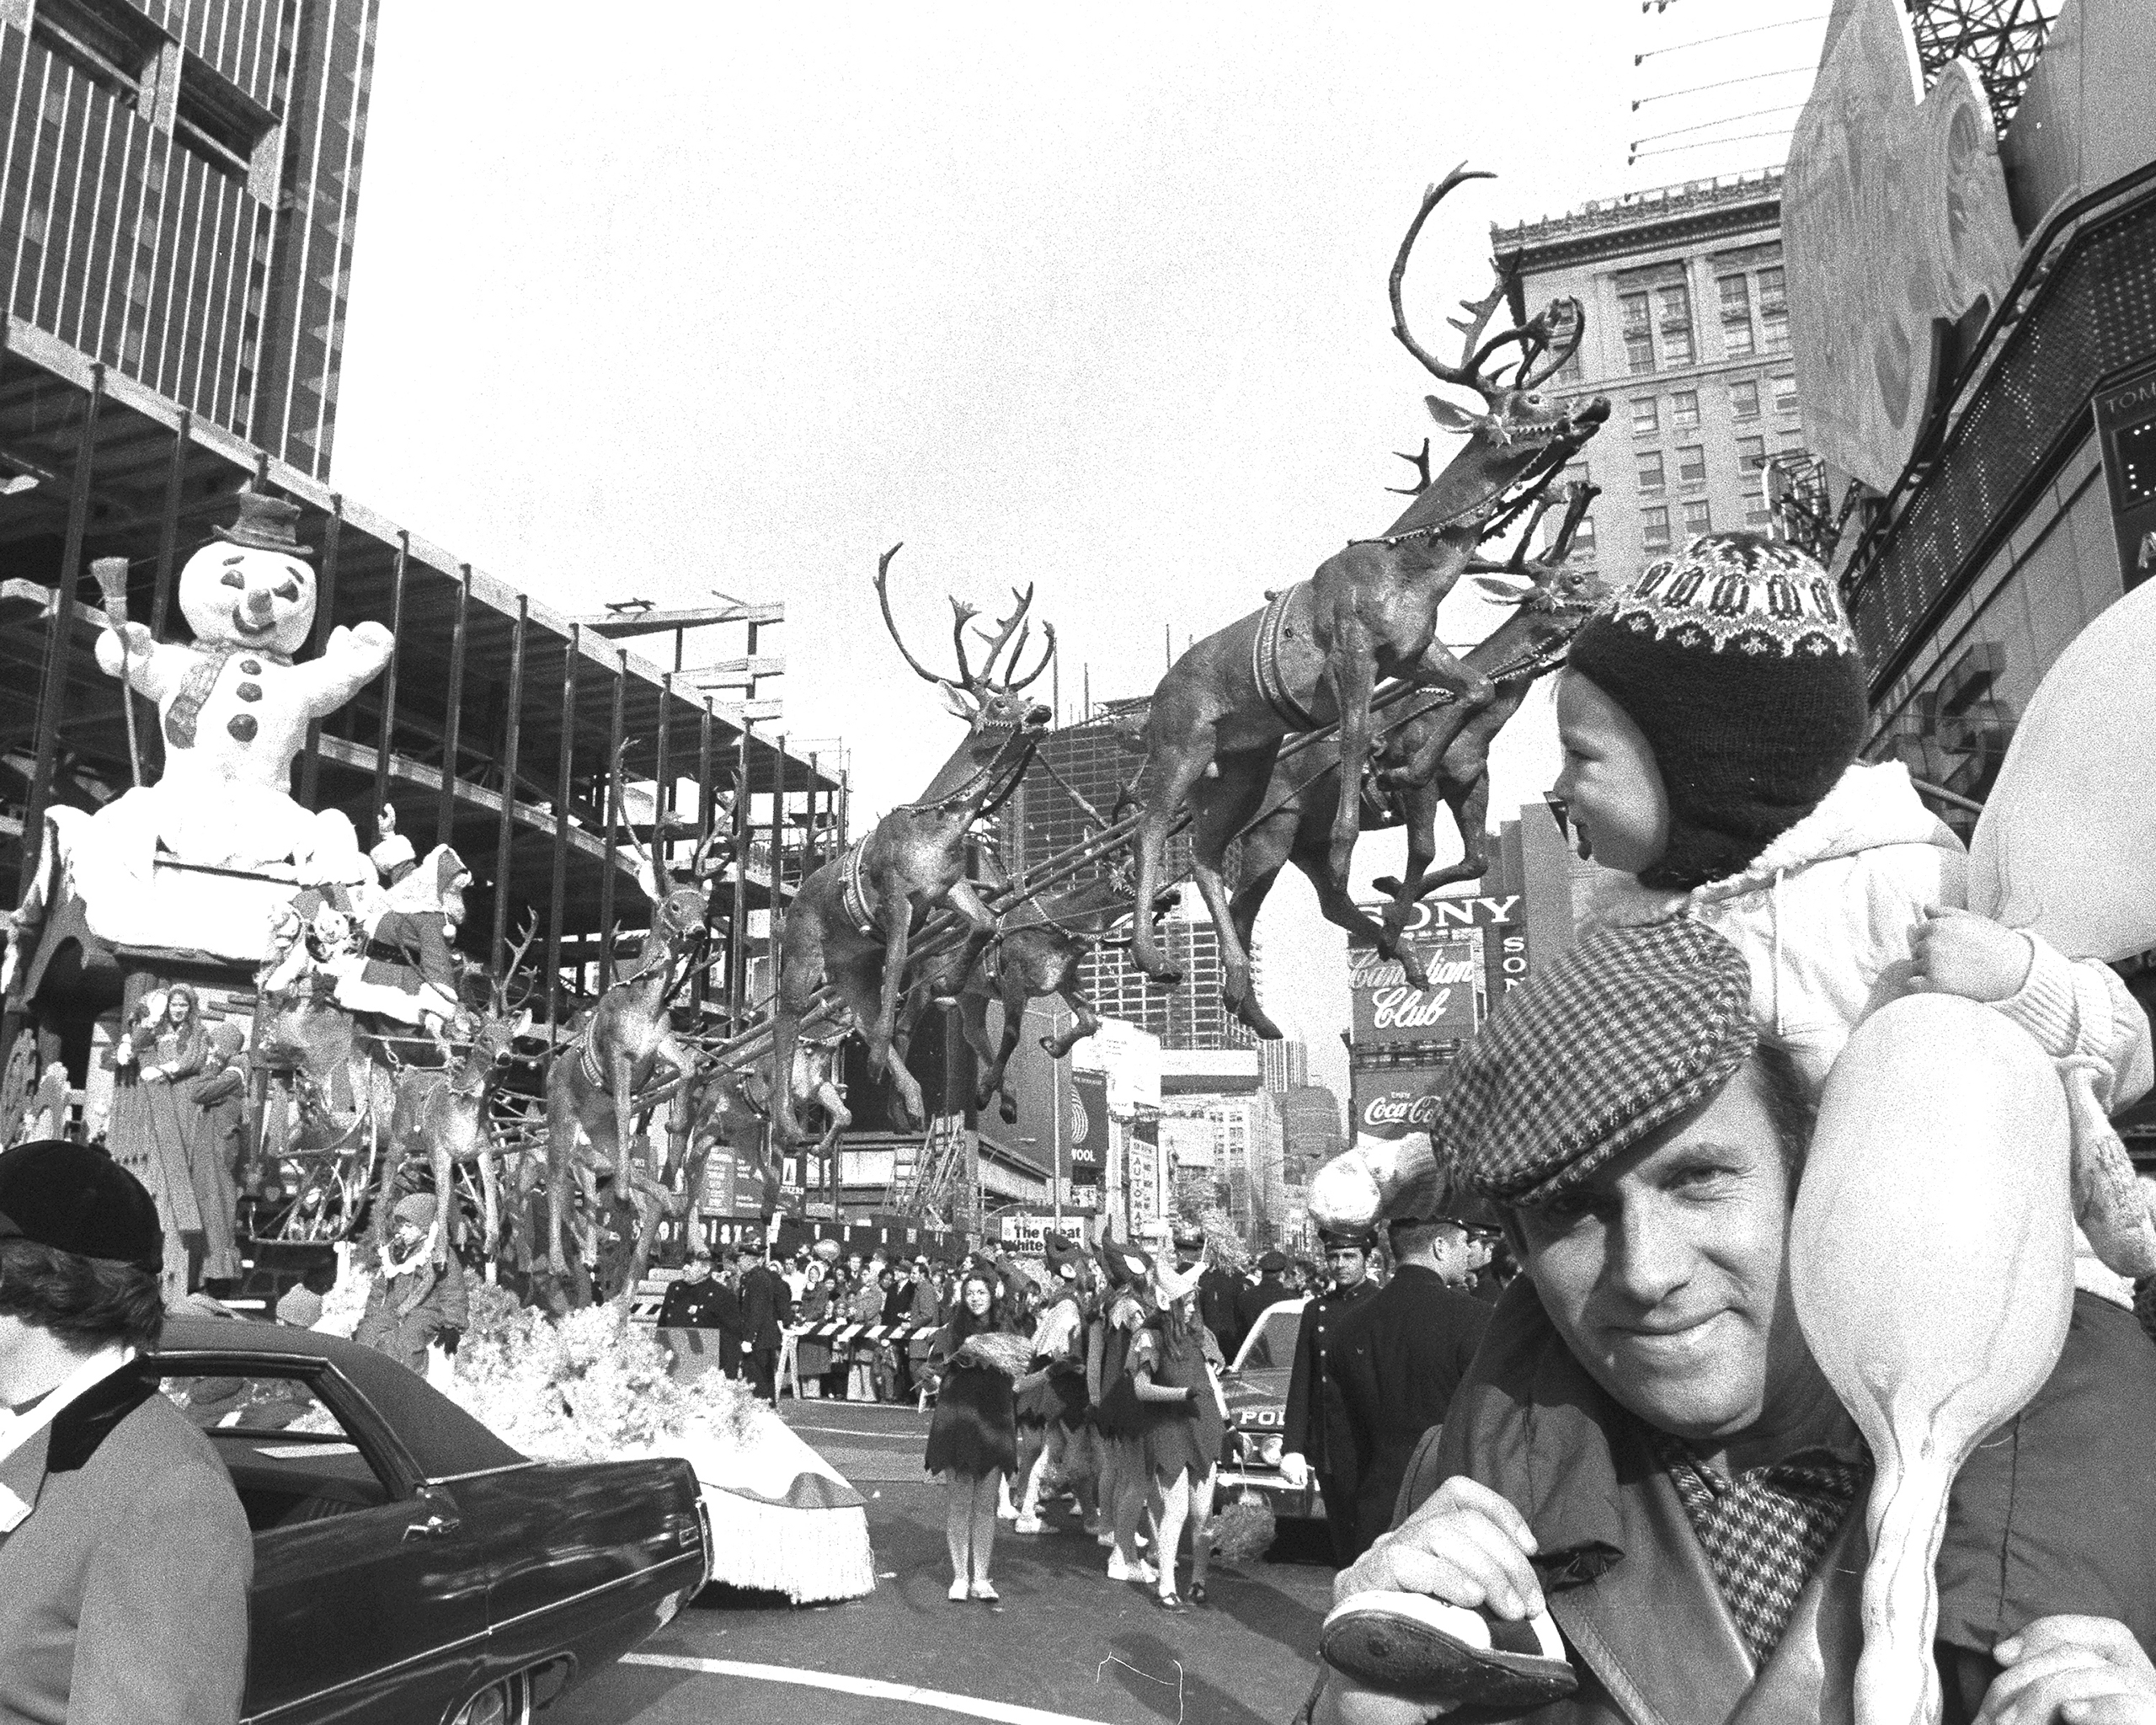 New York City. November 26th, 1970. A snowman, eight tiny reindeer and a few thousand other accompany Santa Claus as he sails through Macy's Thanksgiving Day parade in Times Square.